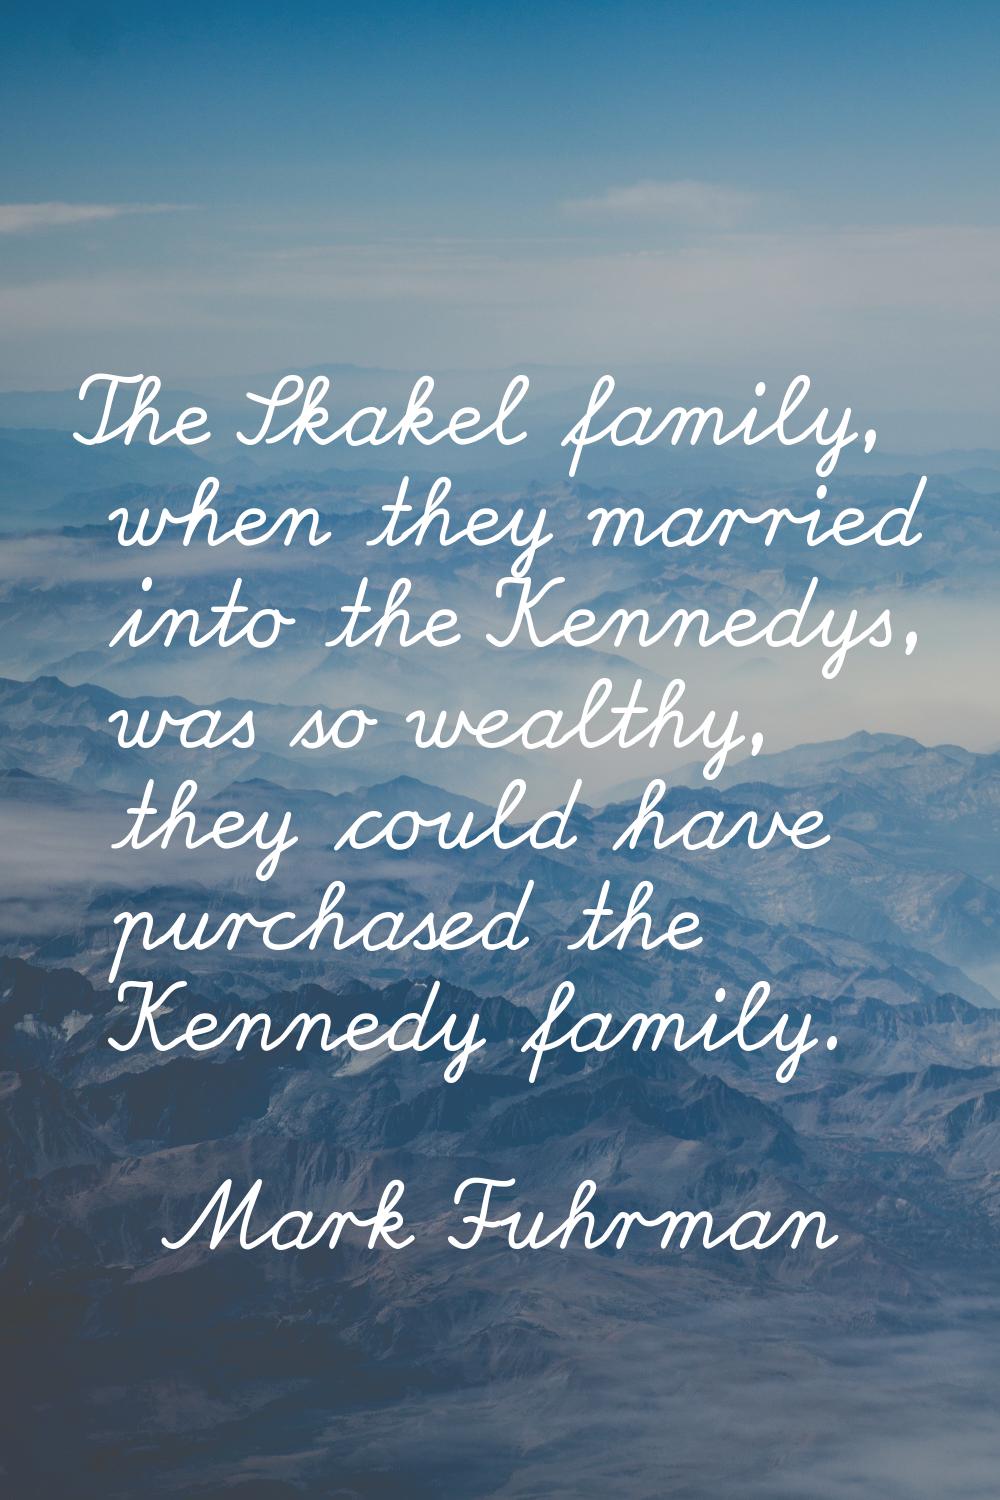 The Skakel family, when they married into the Kennedys, was so wealthy, they could have purchased t